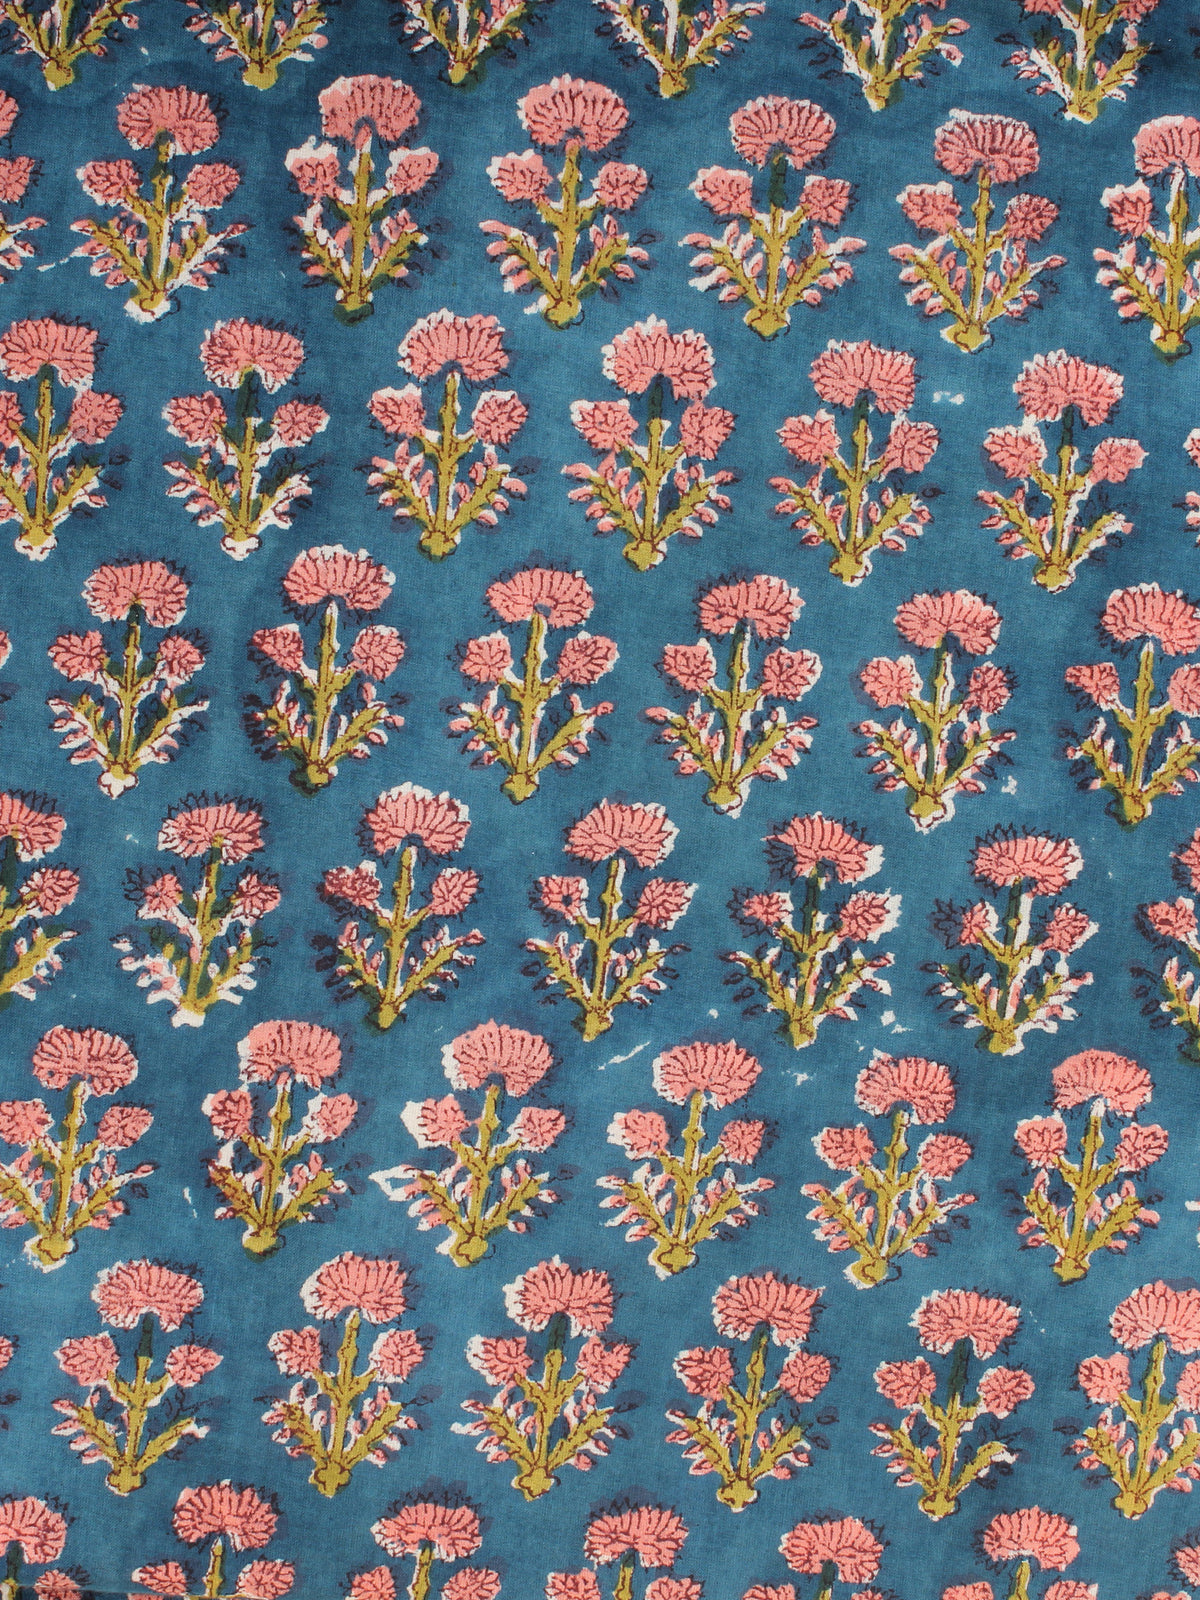 Teal Blue Pink Green Hand Block Printed Cotton Fabric Per Meter - F001F2174